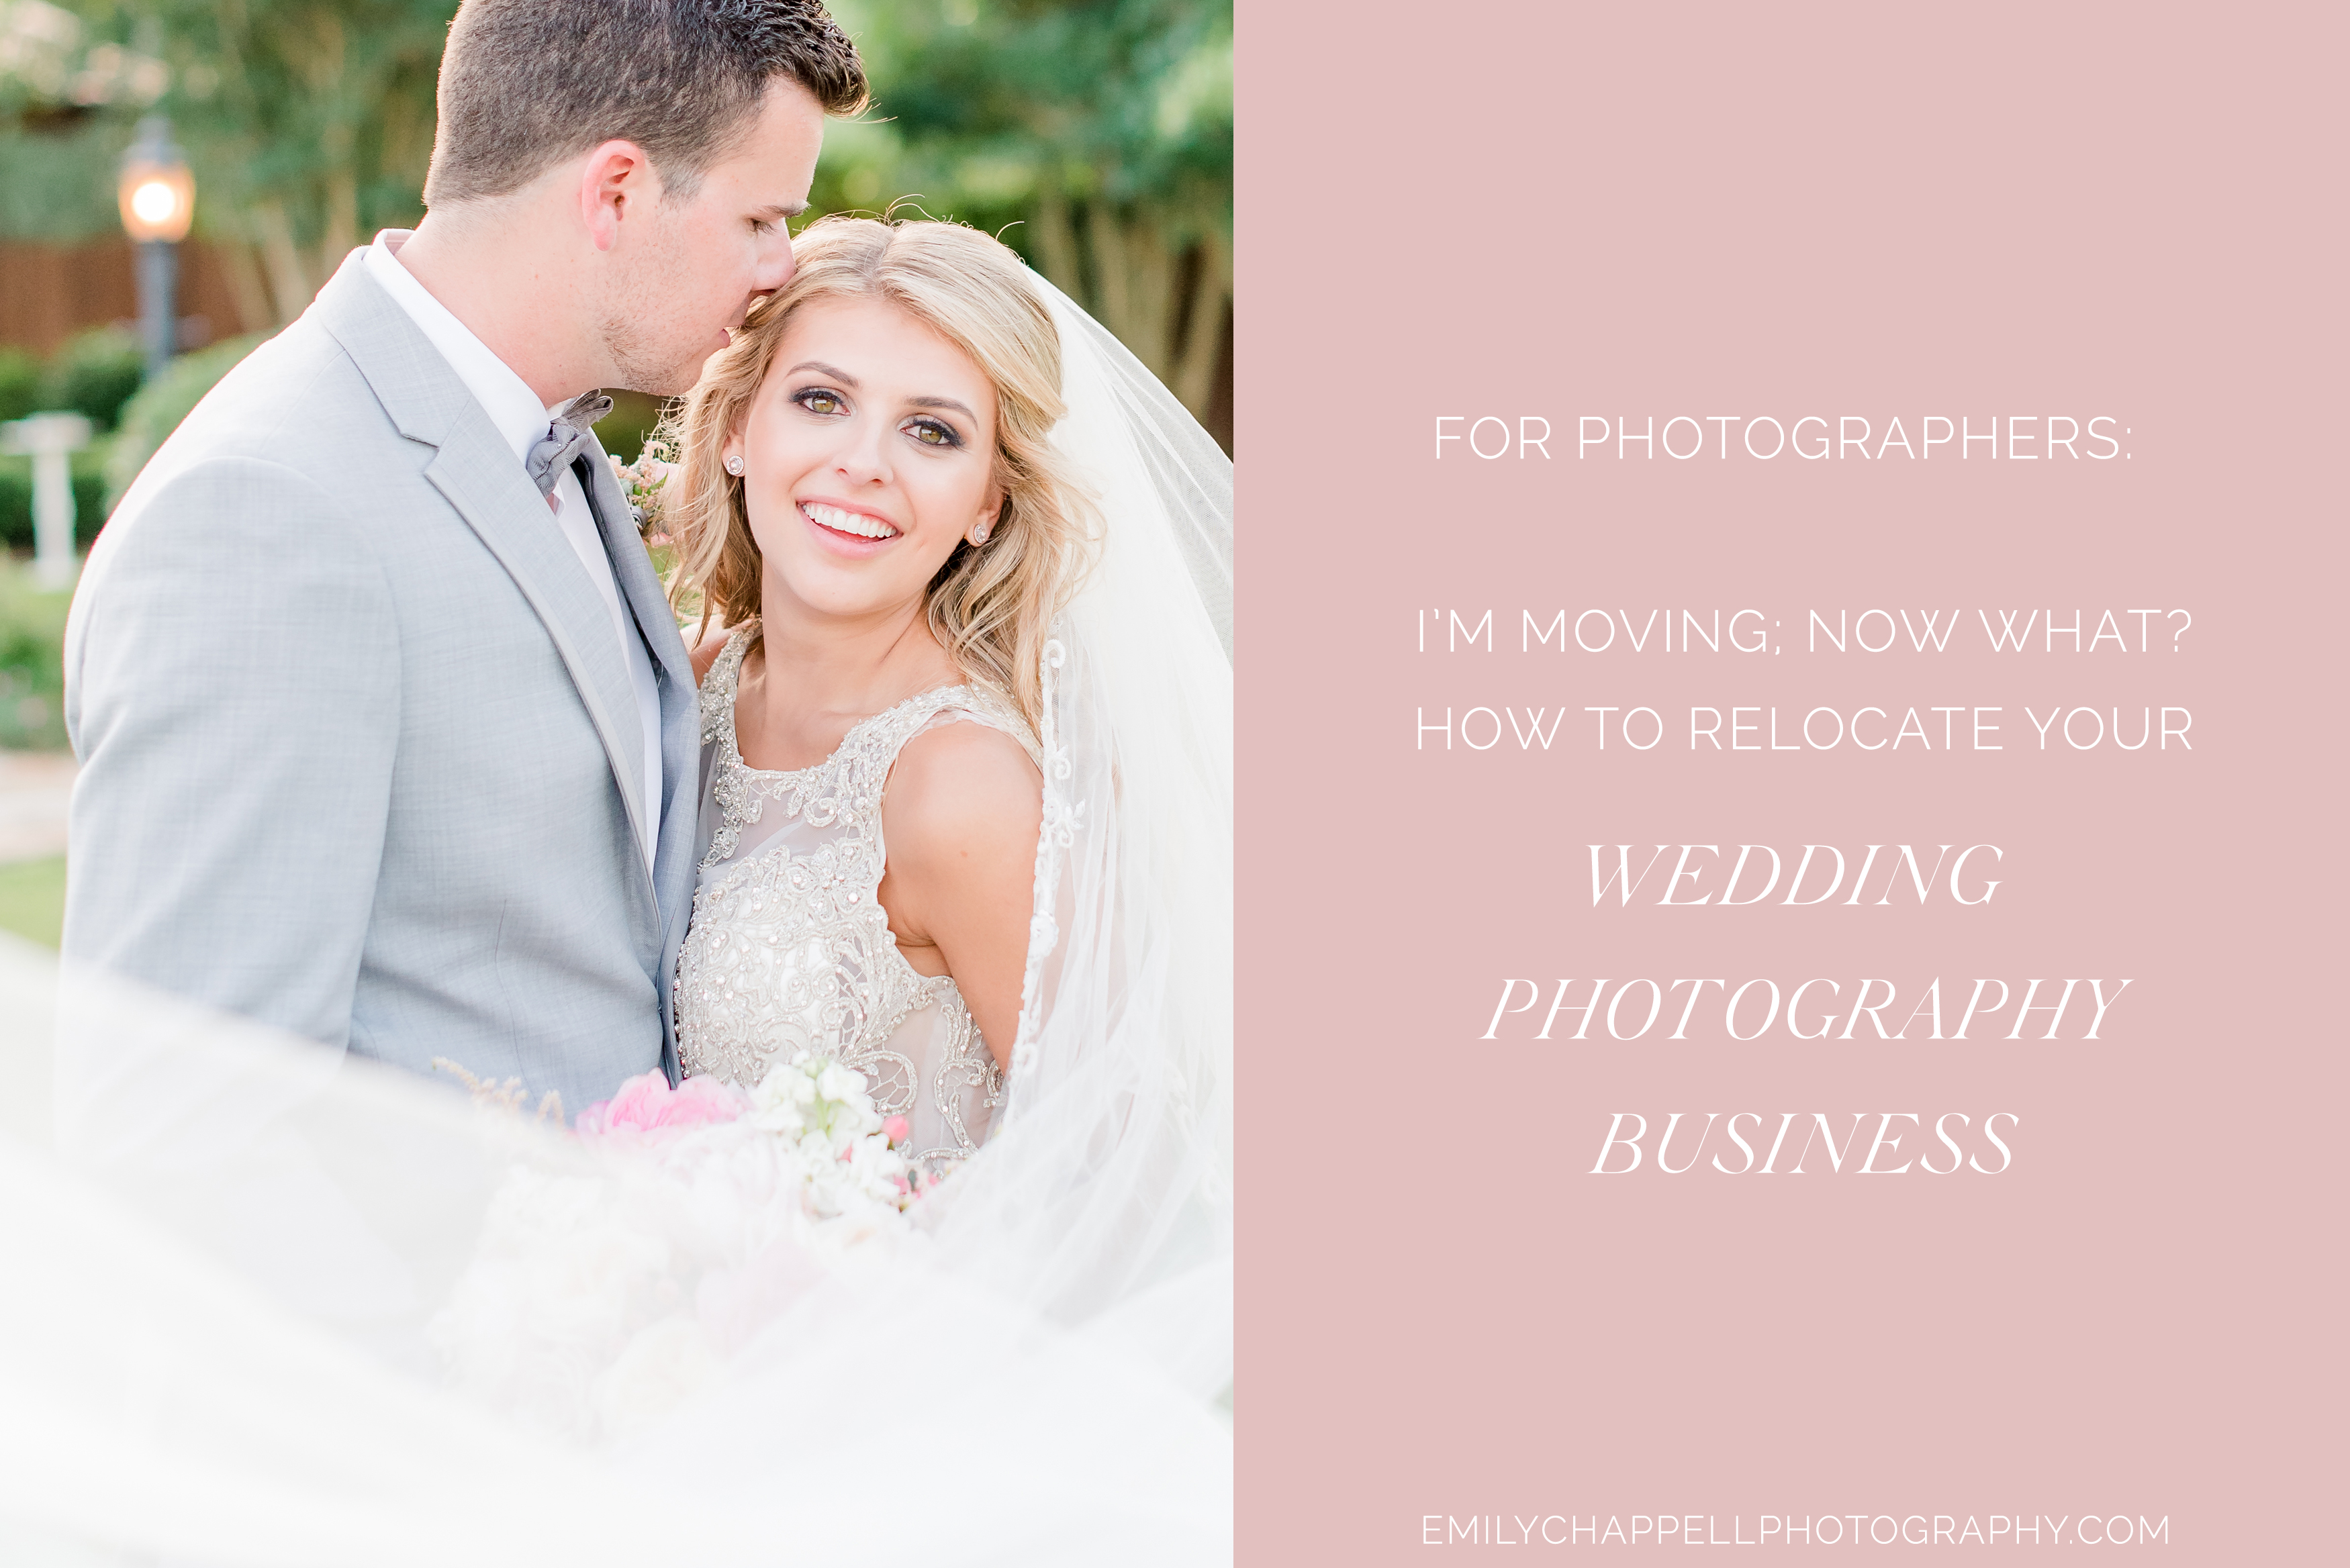 relocate your wedding photography business moving